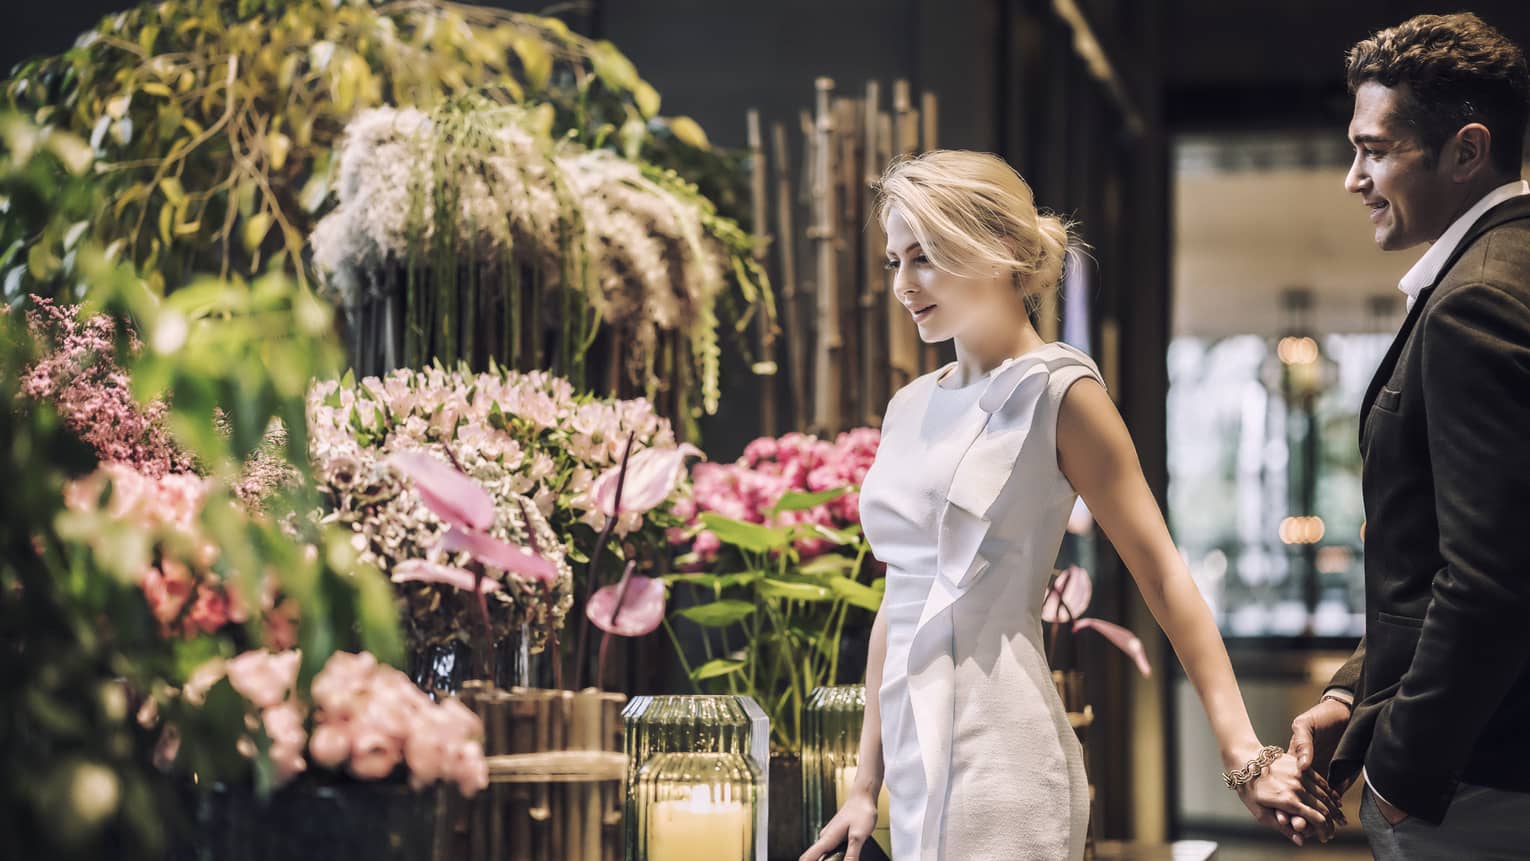 Woman and man admire large floral arrangements in hotel